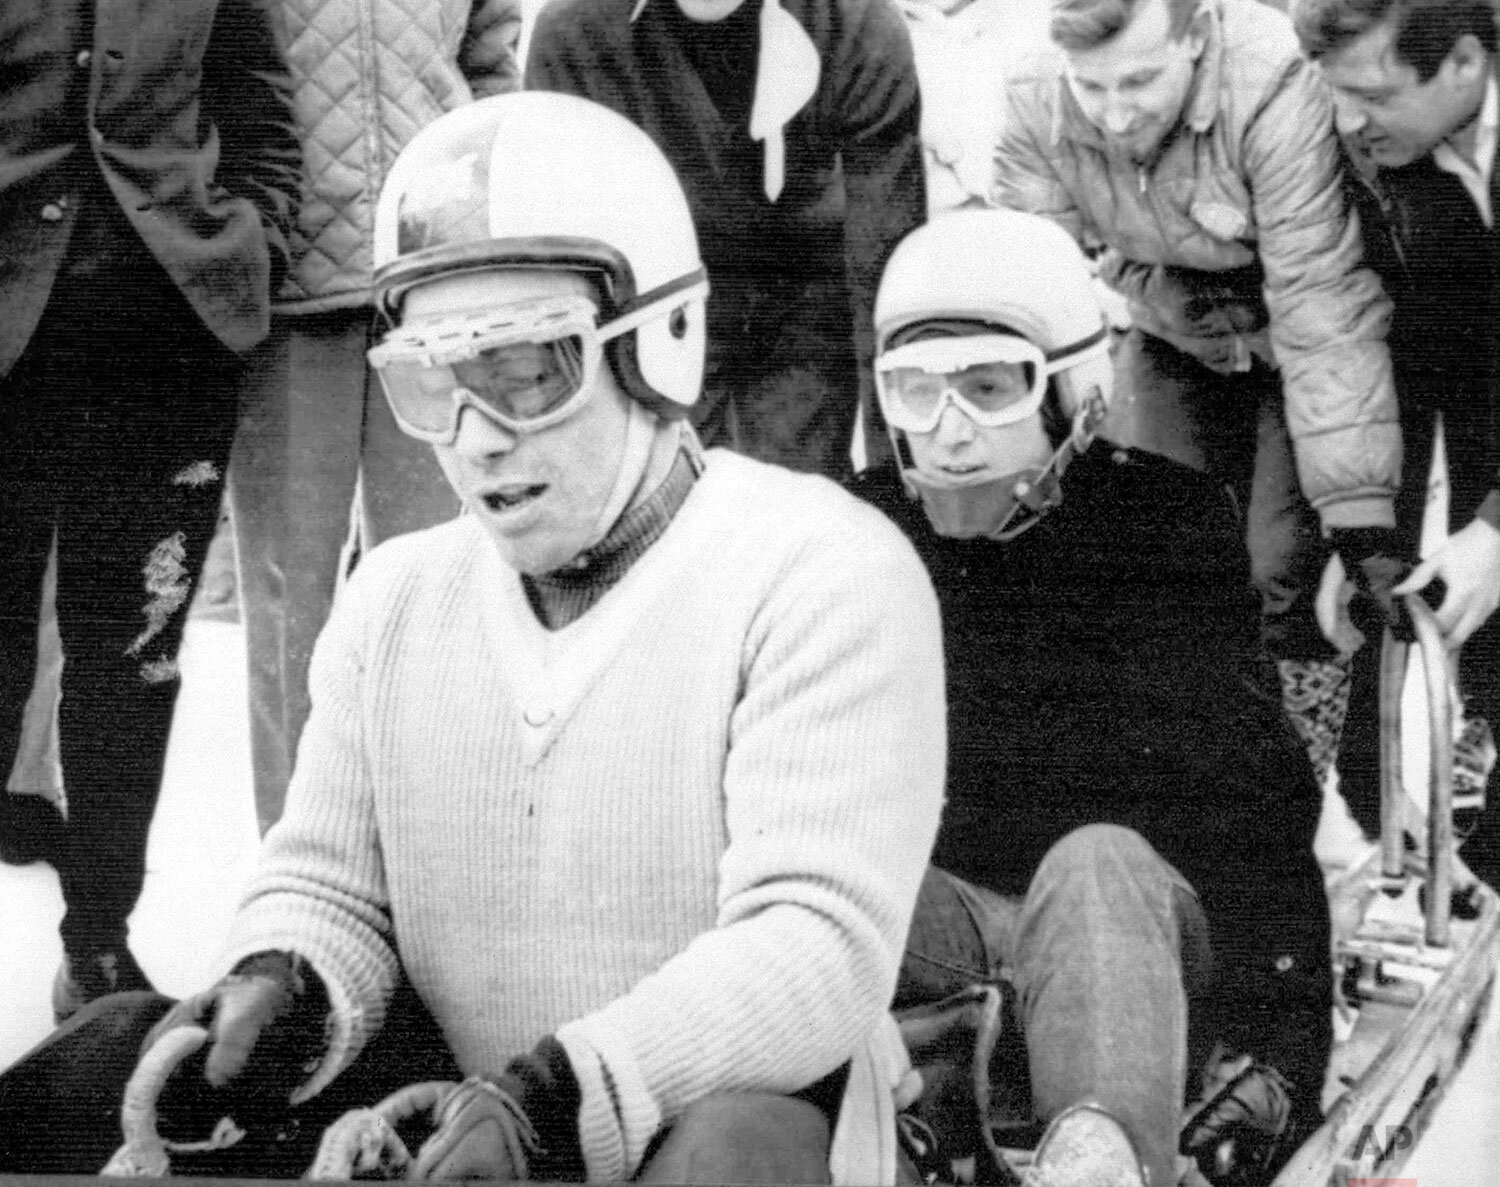  Wearing crash helmet and goggles, Beatle John Lennon, right, sits in the brakeman position for a bobsled ride with British Olympic Gold medallist Tony Nash, at St. Moritz, Switzerland, Feb. 8, 1965. Lennon was on a private skiing holiday with his wi